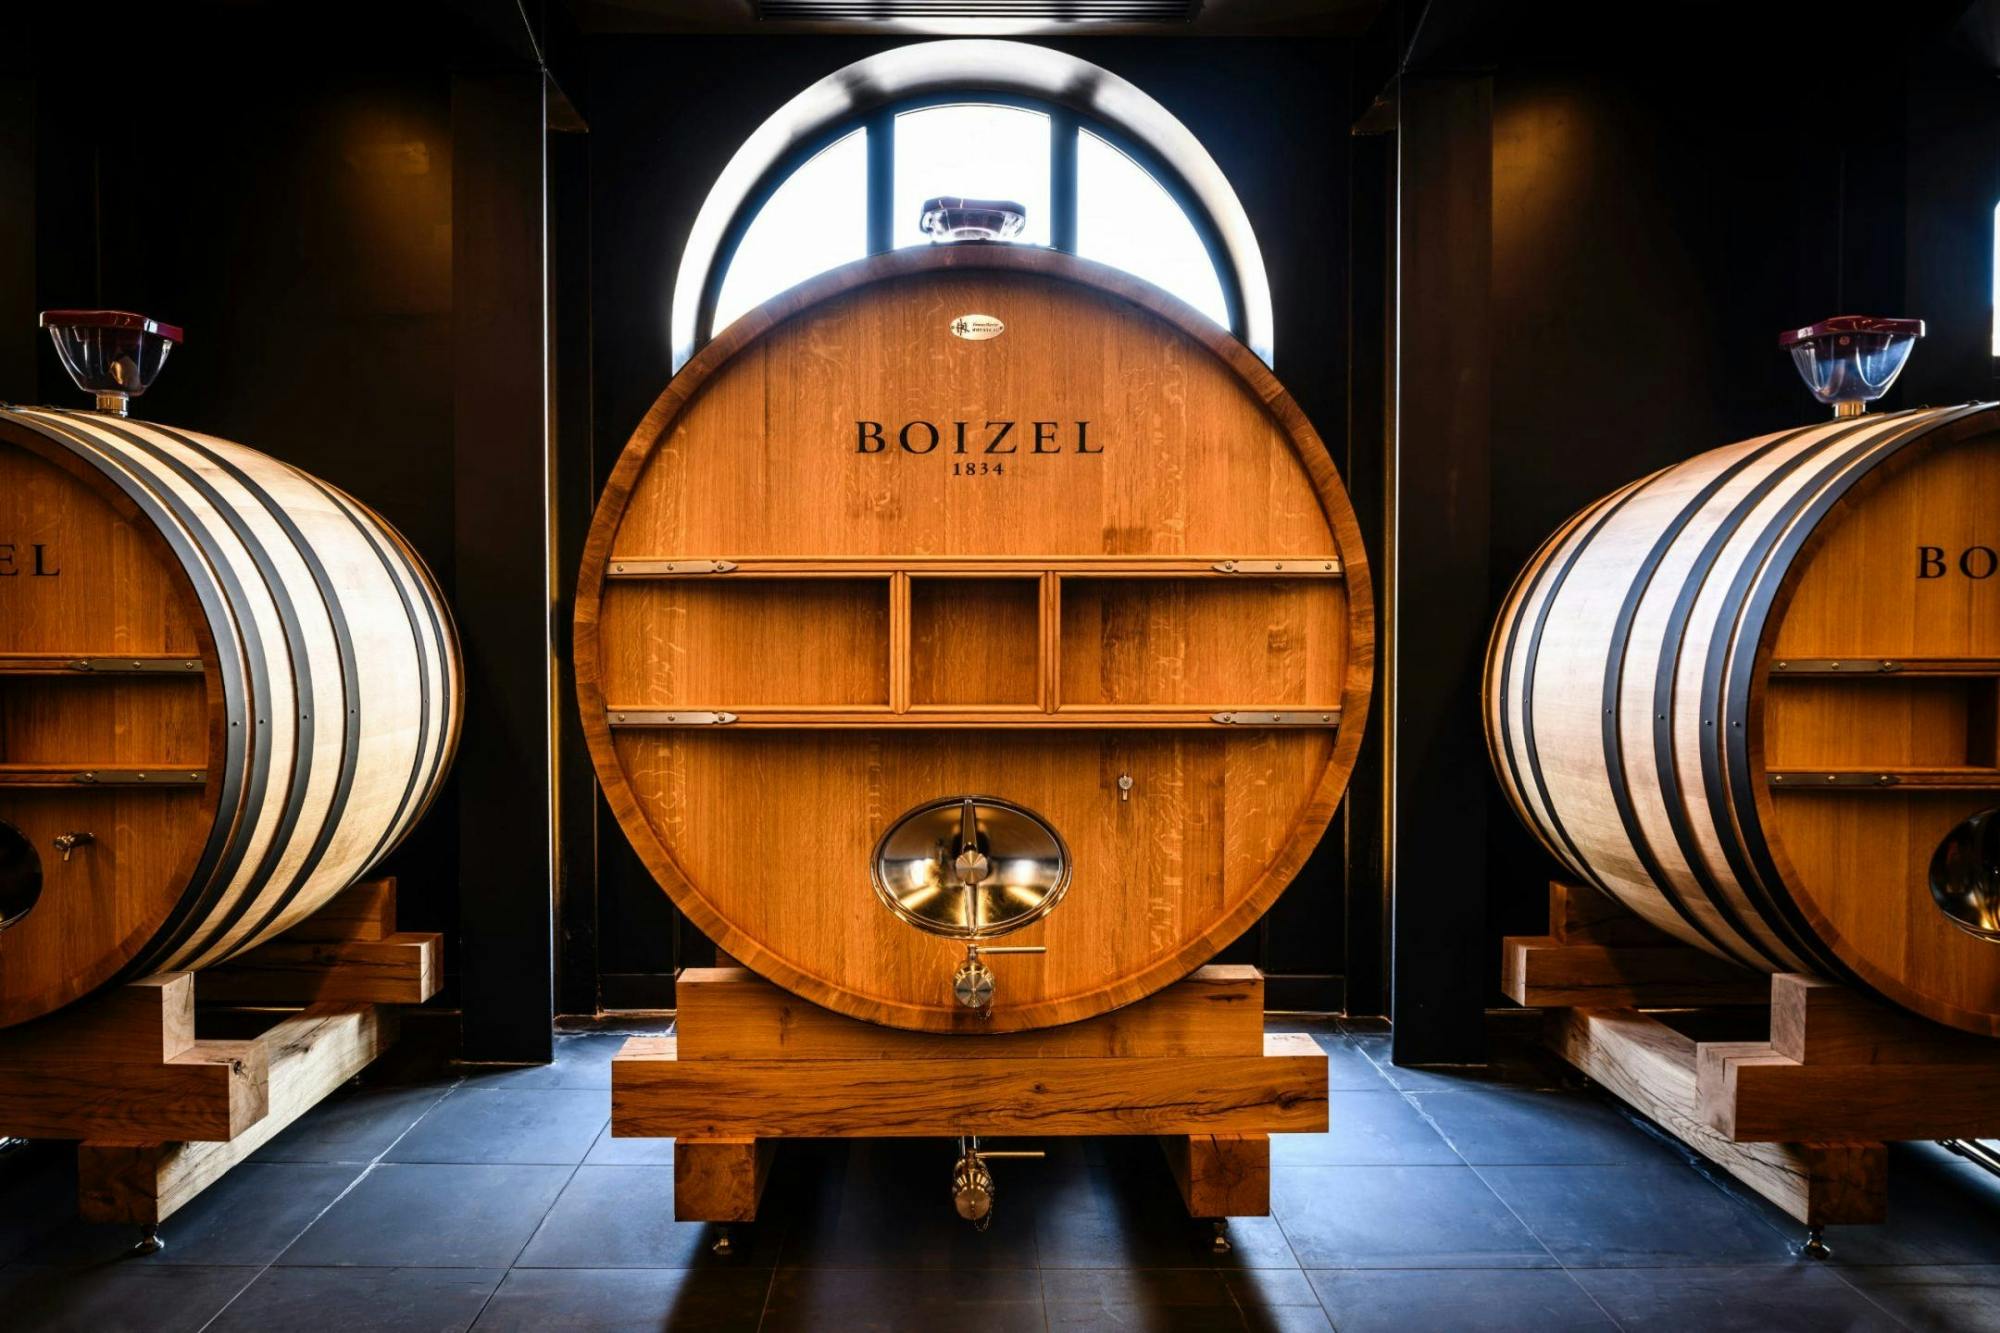 "Millésime" guided tour of the Boizel Champagne house with included tasting Musement